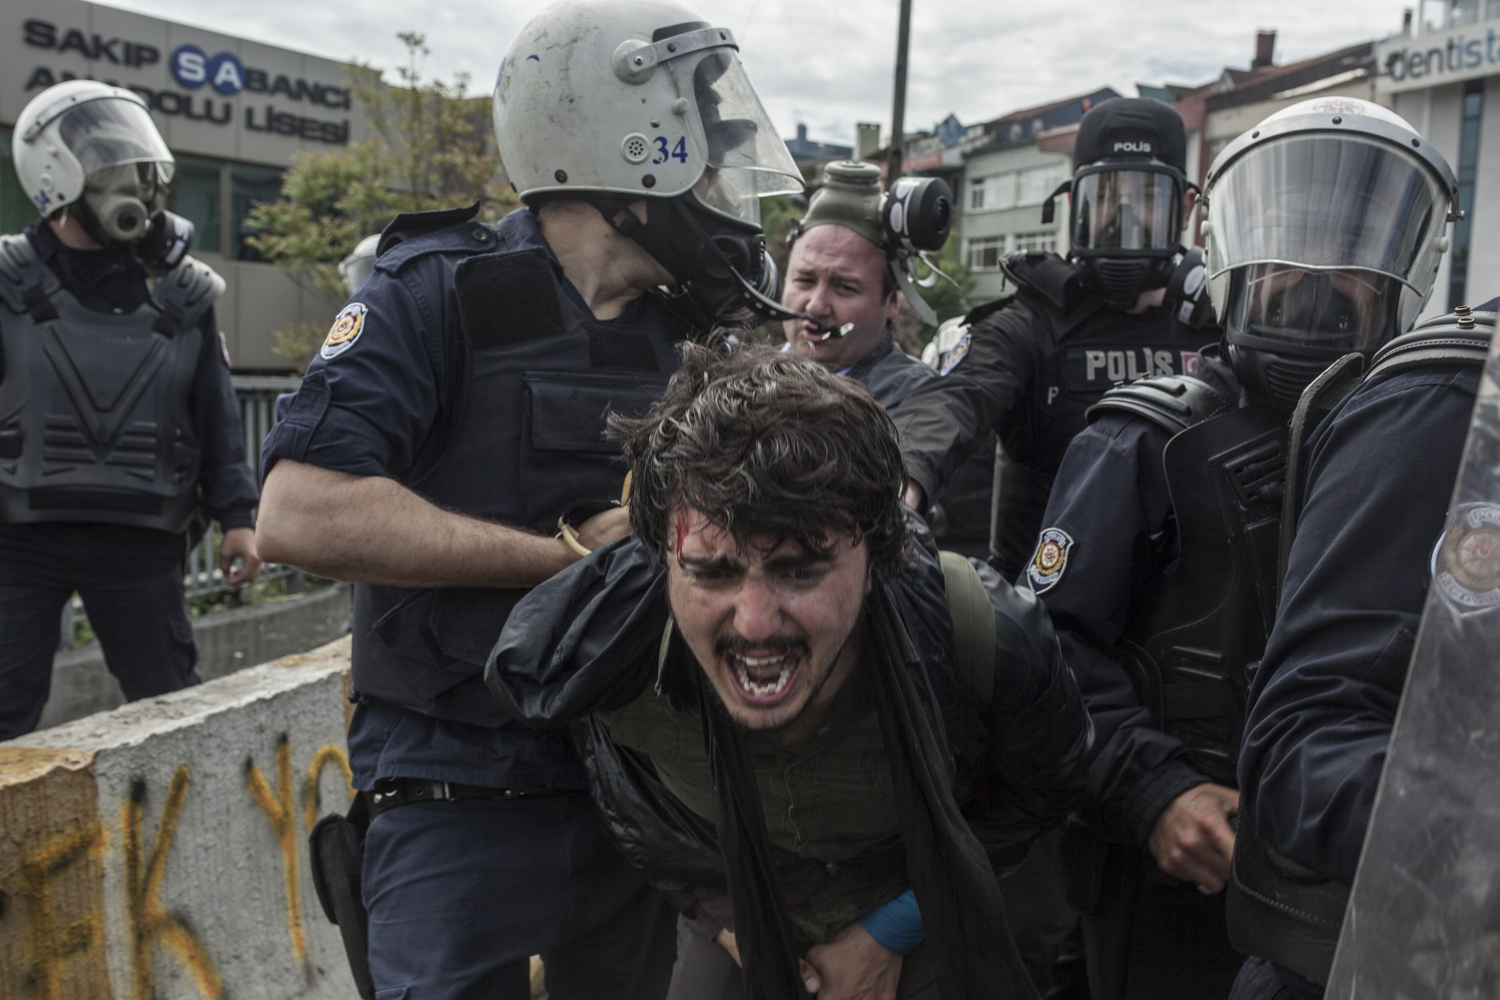 A protester is being taken into custody during the protest in Istanbul, May 1, 2014.